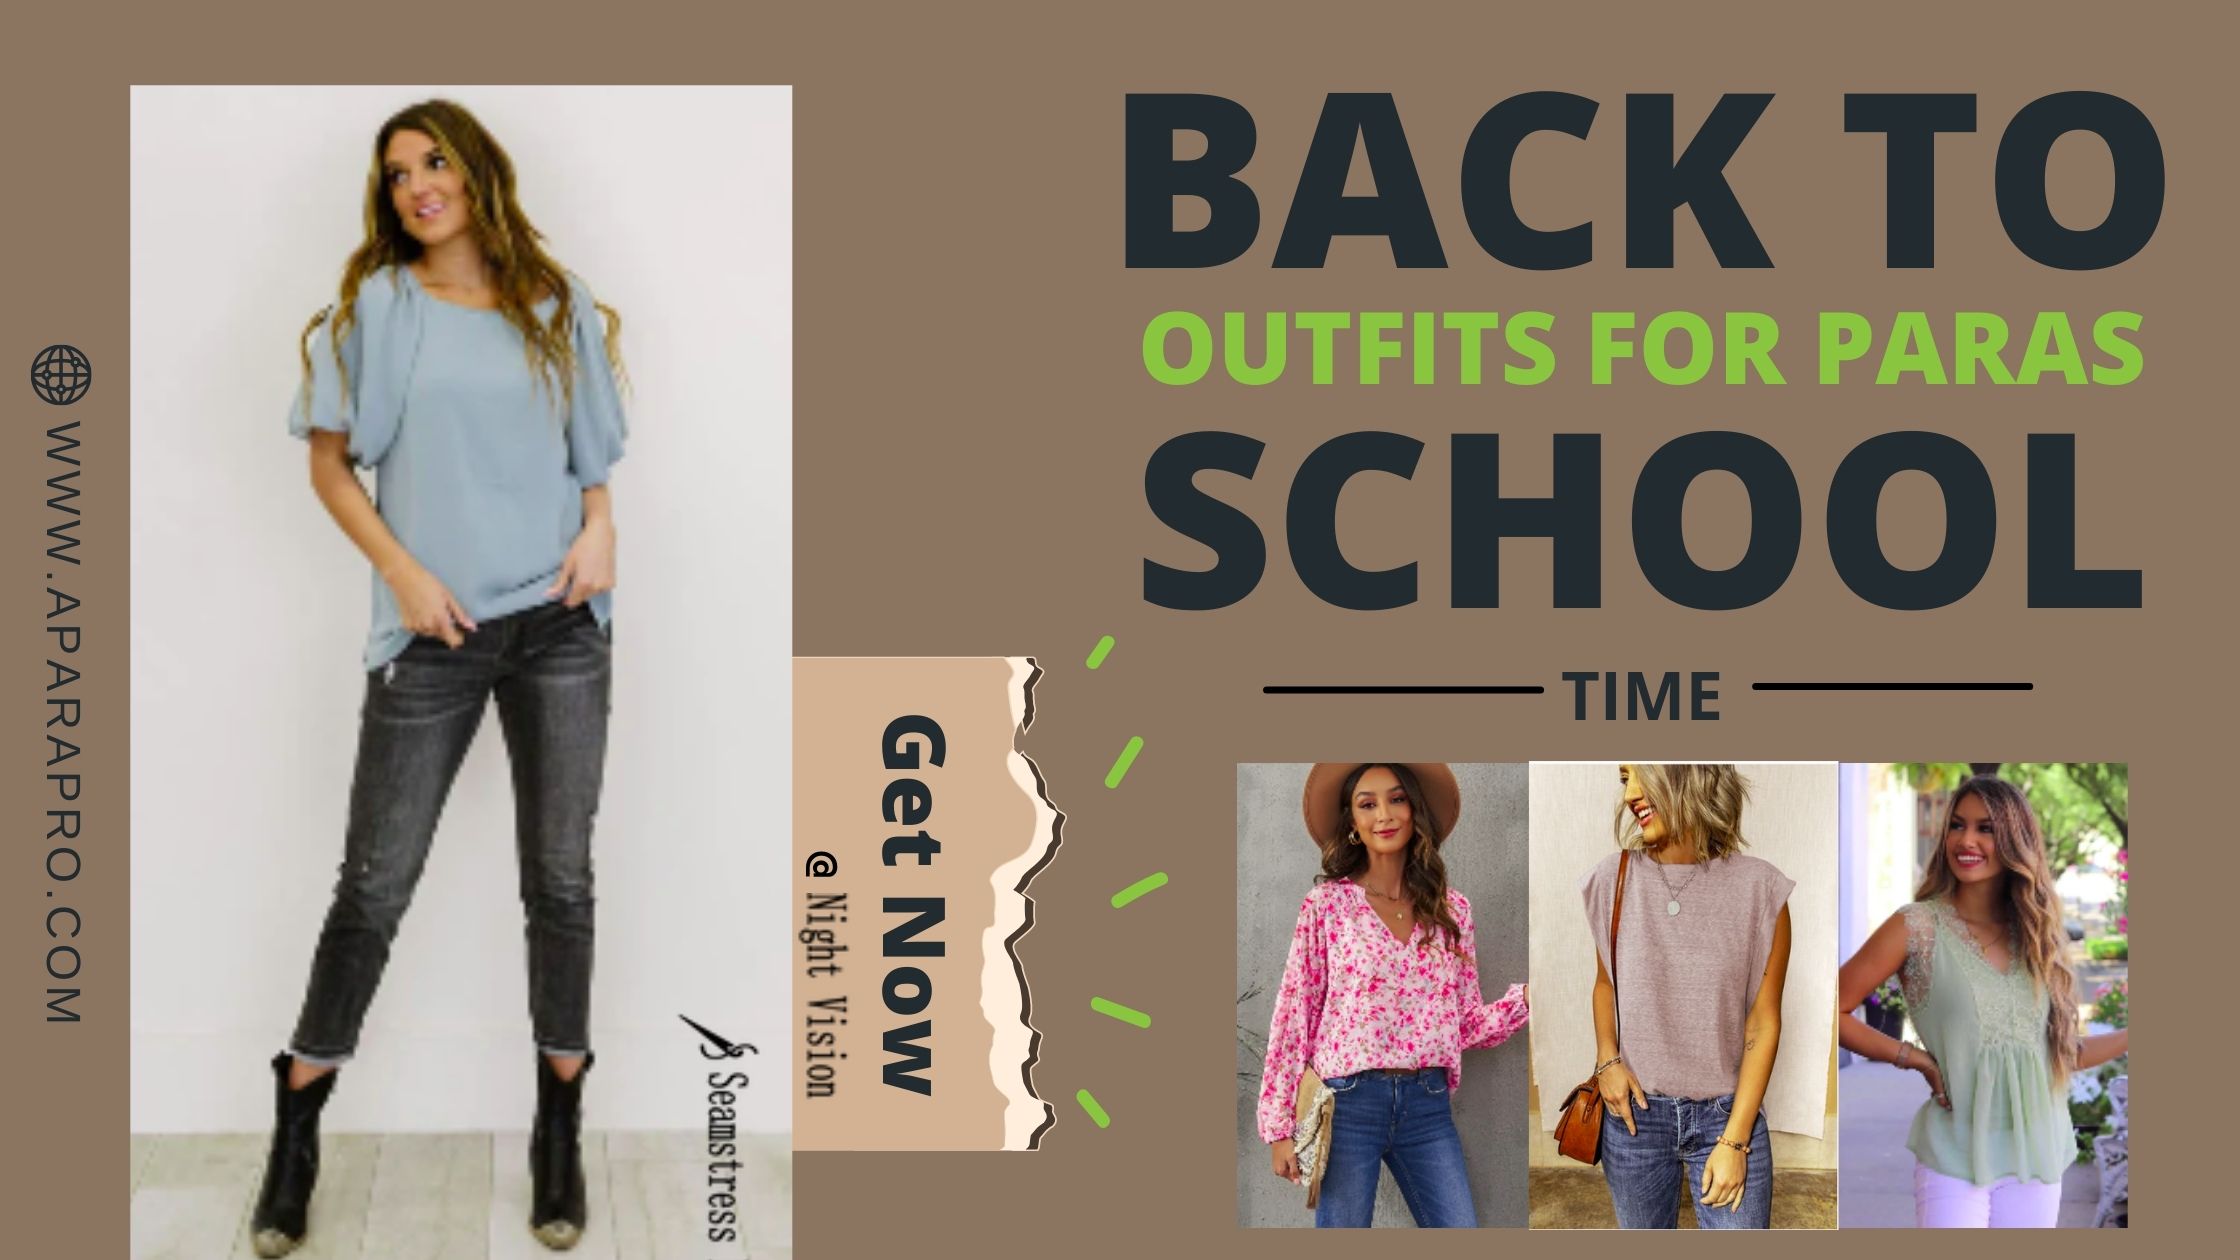 Back to School Outfits for Paraeducators with Night Vision Seamstress Fashion by A Para Pro